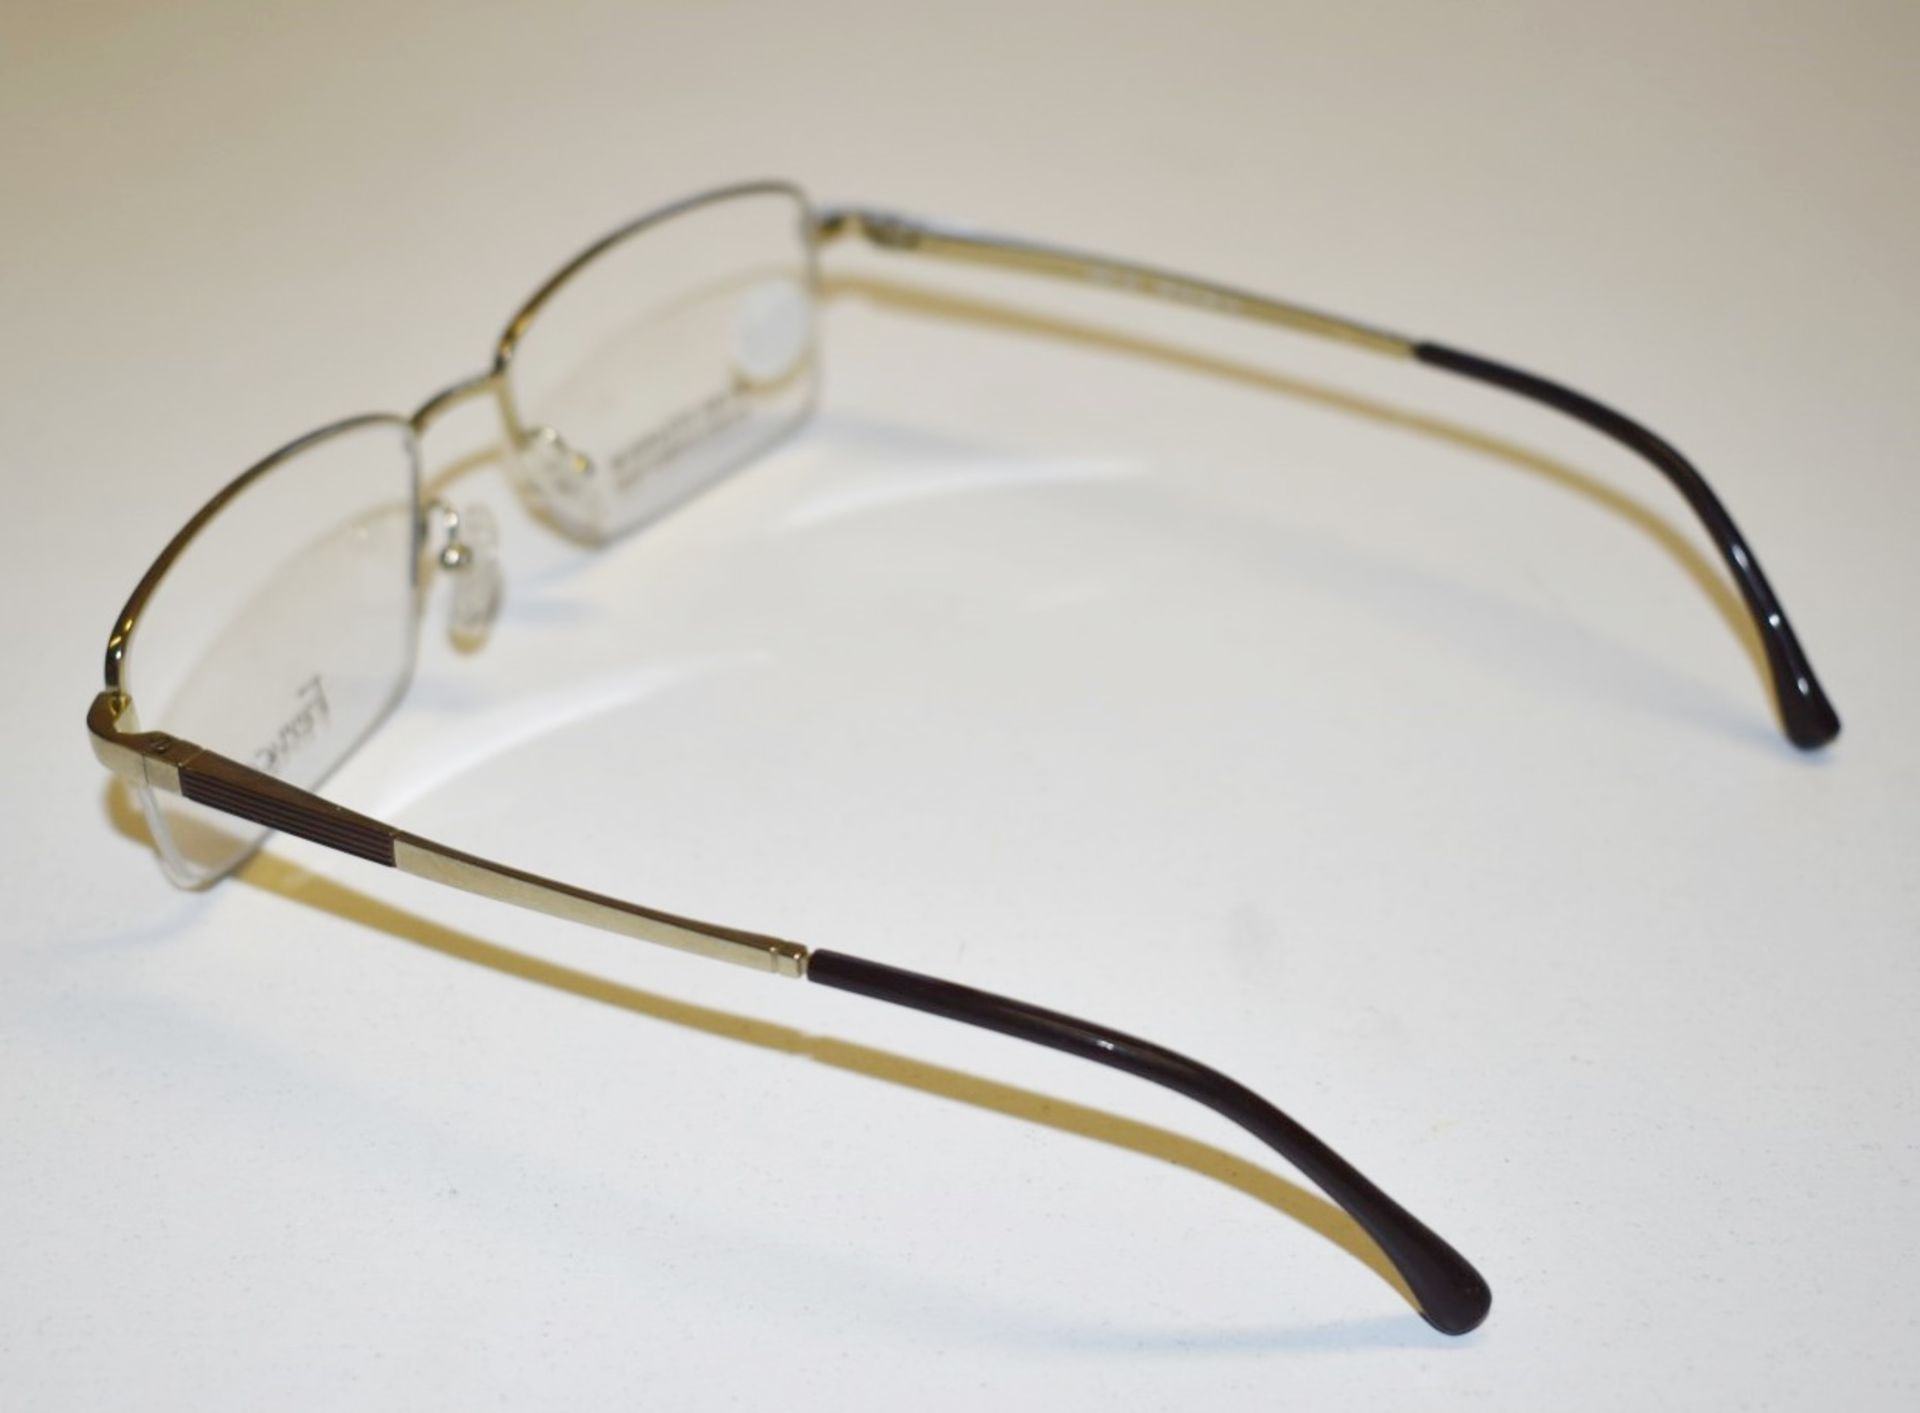 1 x Genuine FERUCCI Spectacle Eye Glasses Frame - Ex Display Stock  - Ref: GTI182 - CL645 - - Image 8 of 12